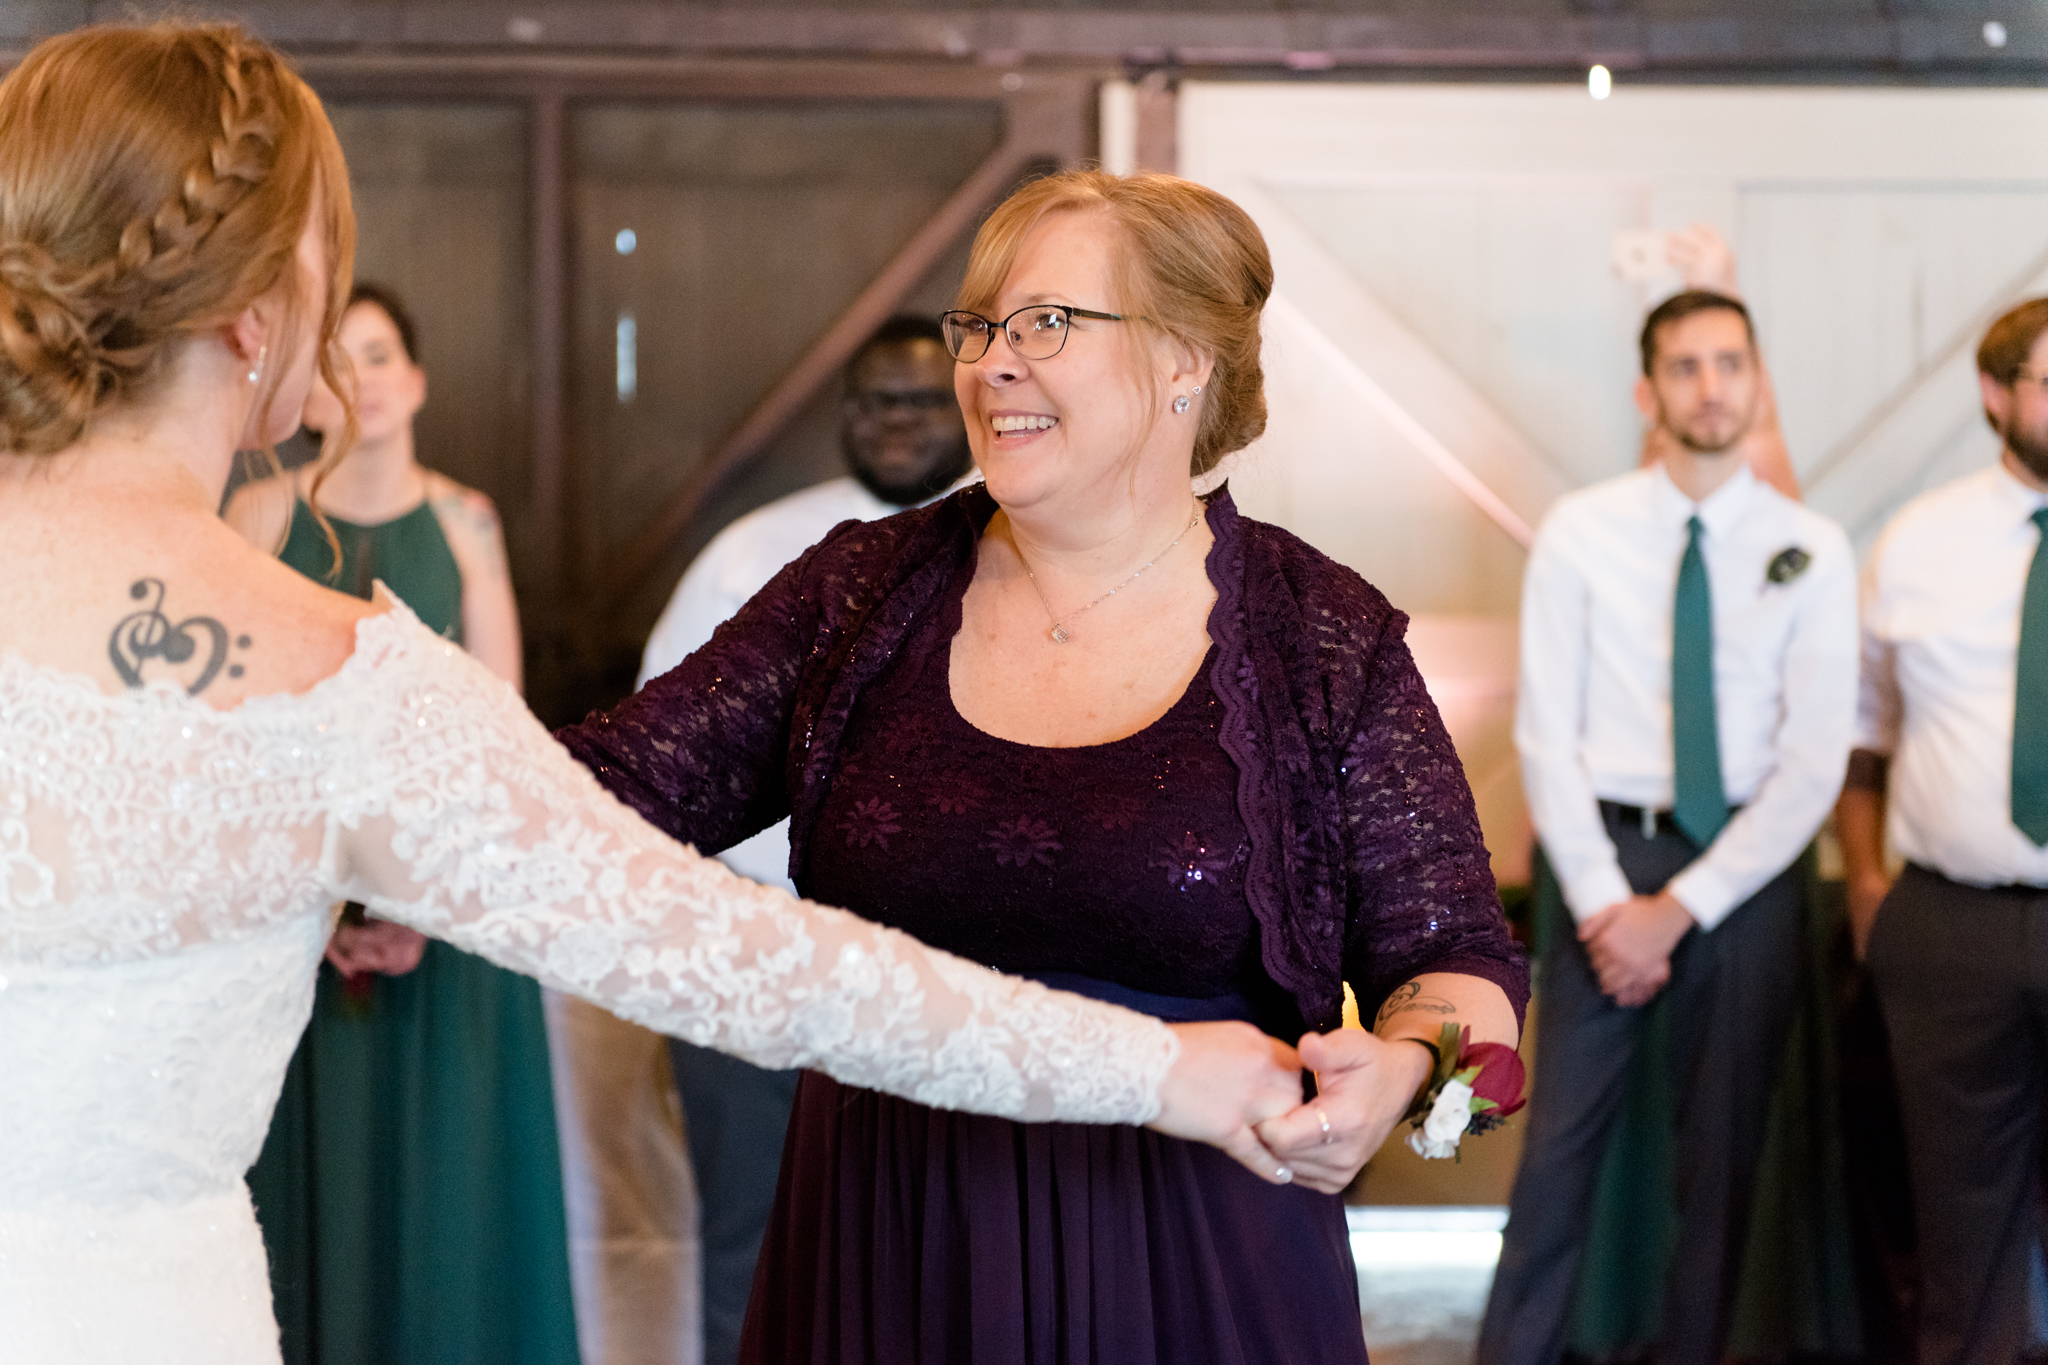 Mother of bride and bride dance at reception.